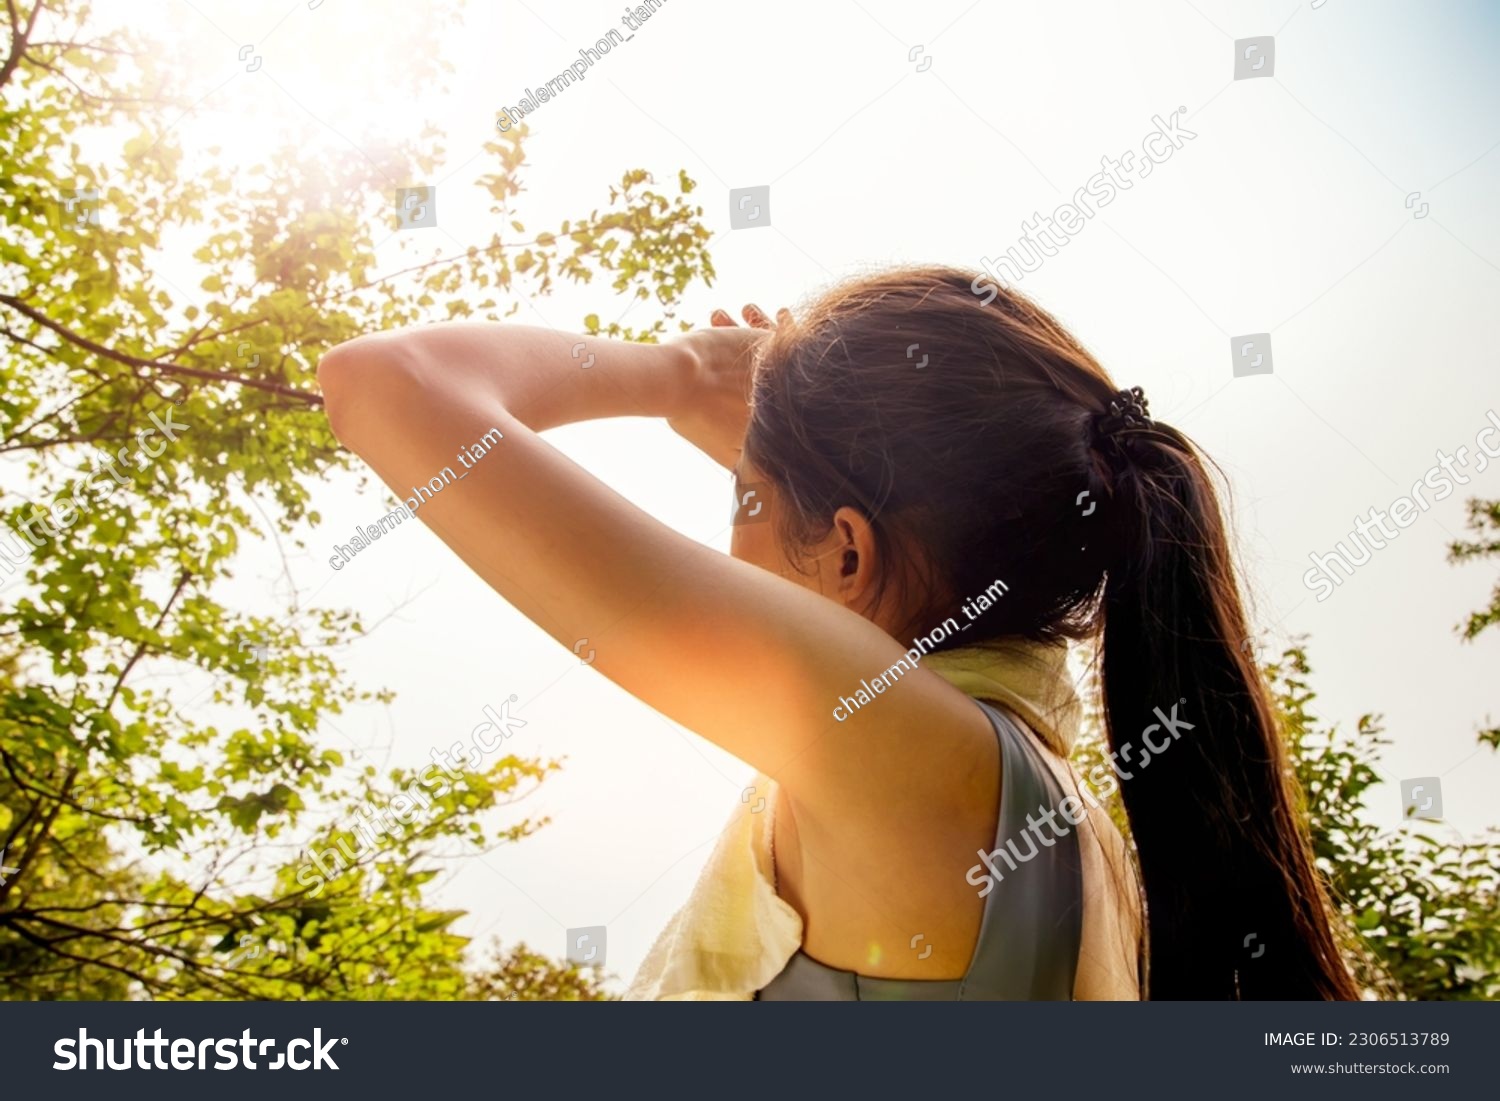 Back view Asian woman doing sport jogging feeling sun and heat too hot during jogging in park sweltering summer weather covering face with hands covering face against UV rays. #2306513789